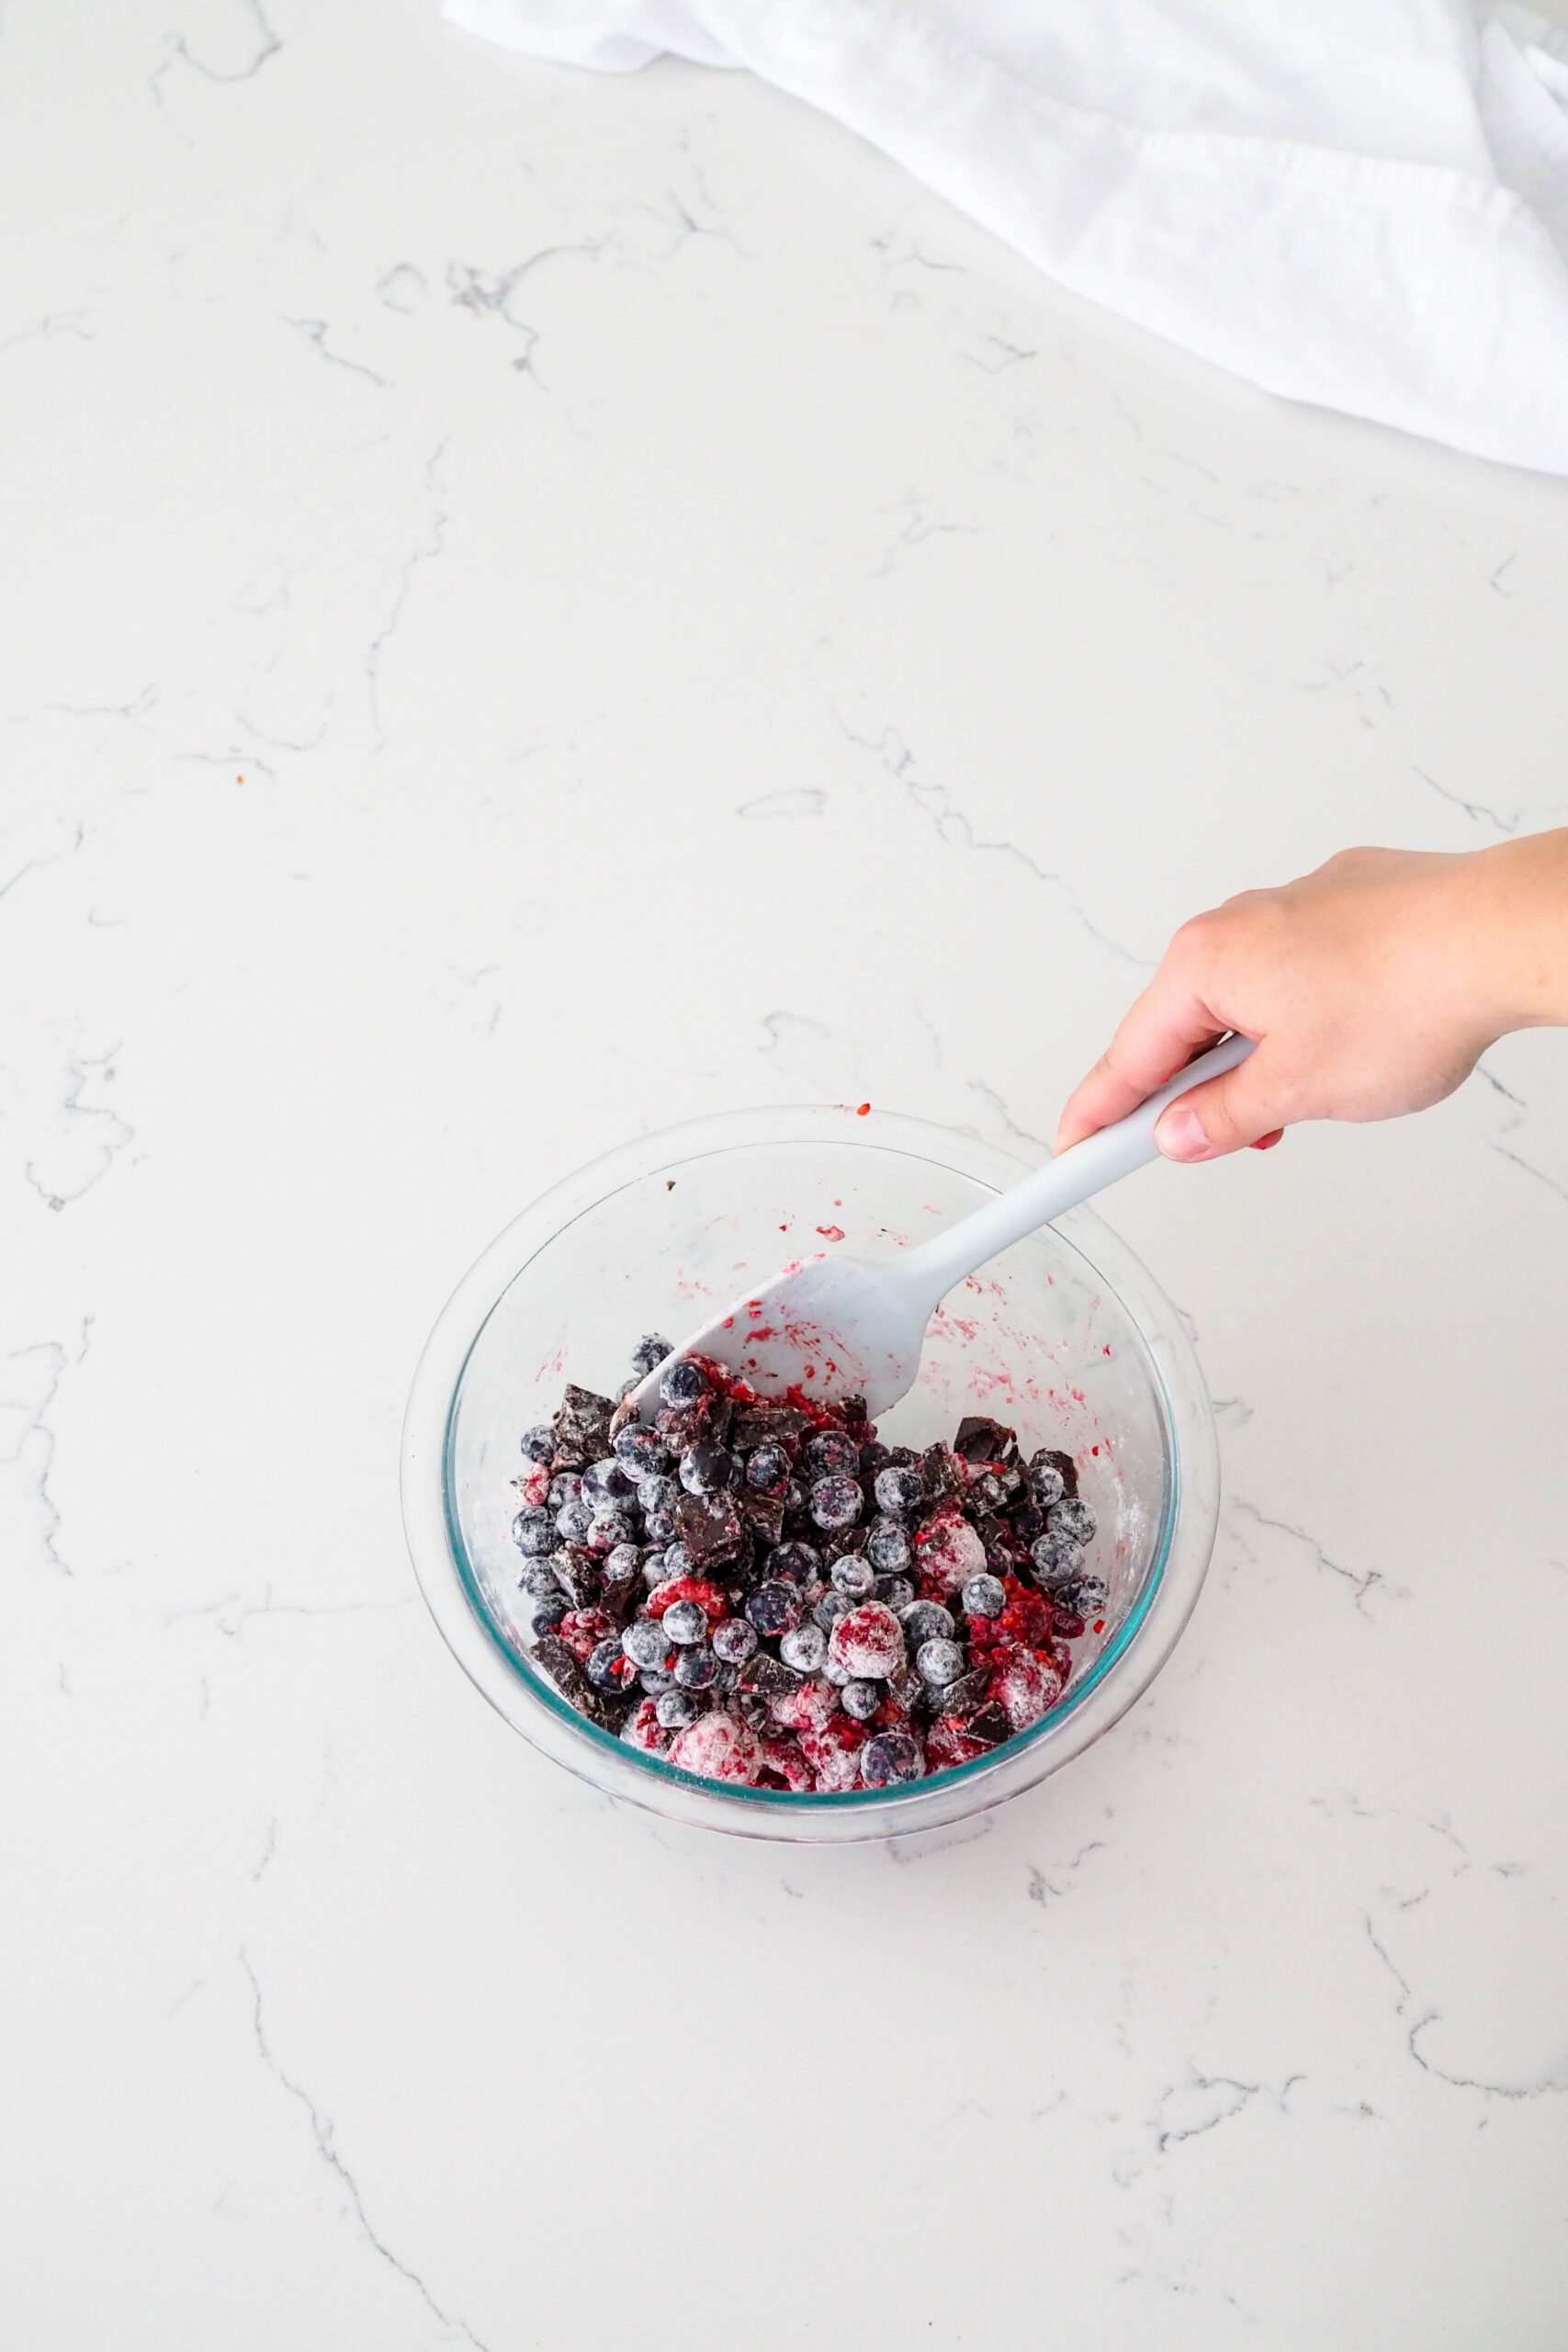 A hand mixes a glass bowl of berries, chocolate, and flour with a spatula.